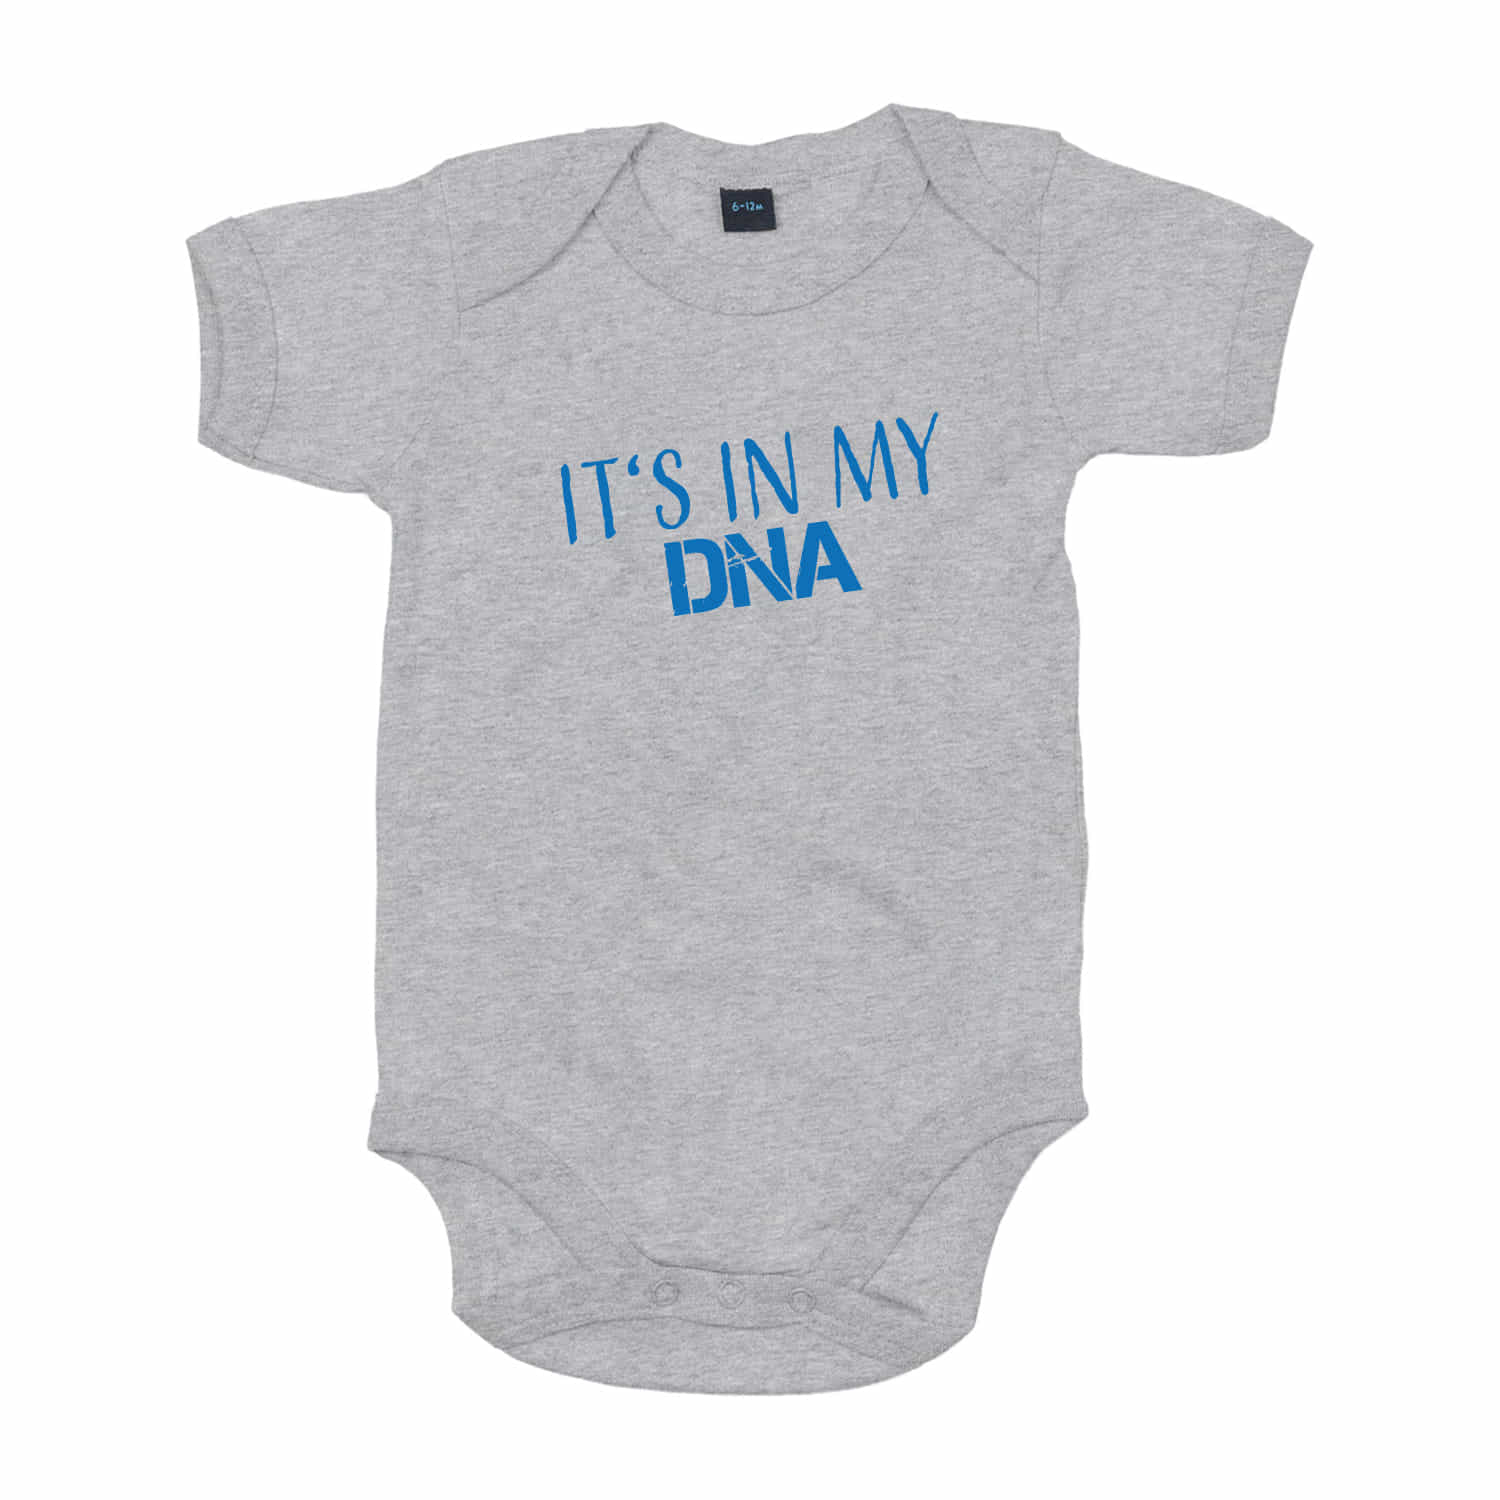 Baby-Body "It's in my DNA"